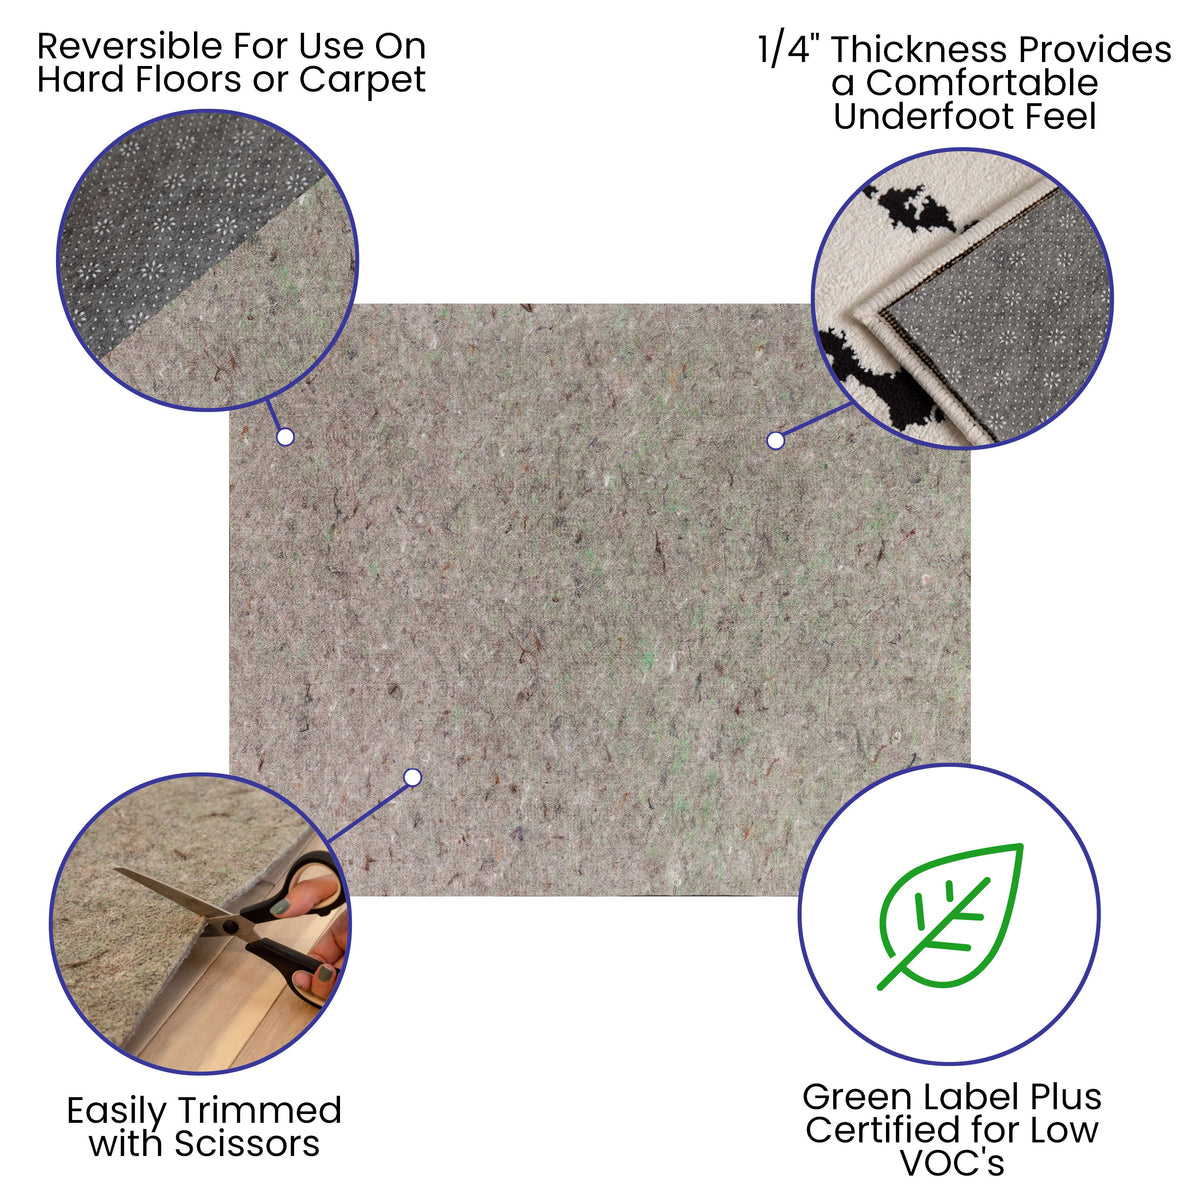 8' x 10' |#| Slide-Stop® Multi-Surface Non-Slip Rug Pad for 8' x 10' Area Rugs, 1/4inch Thick